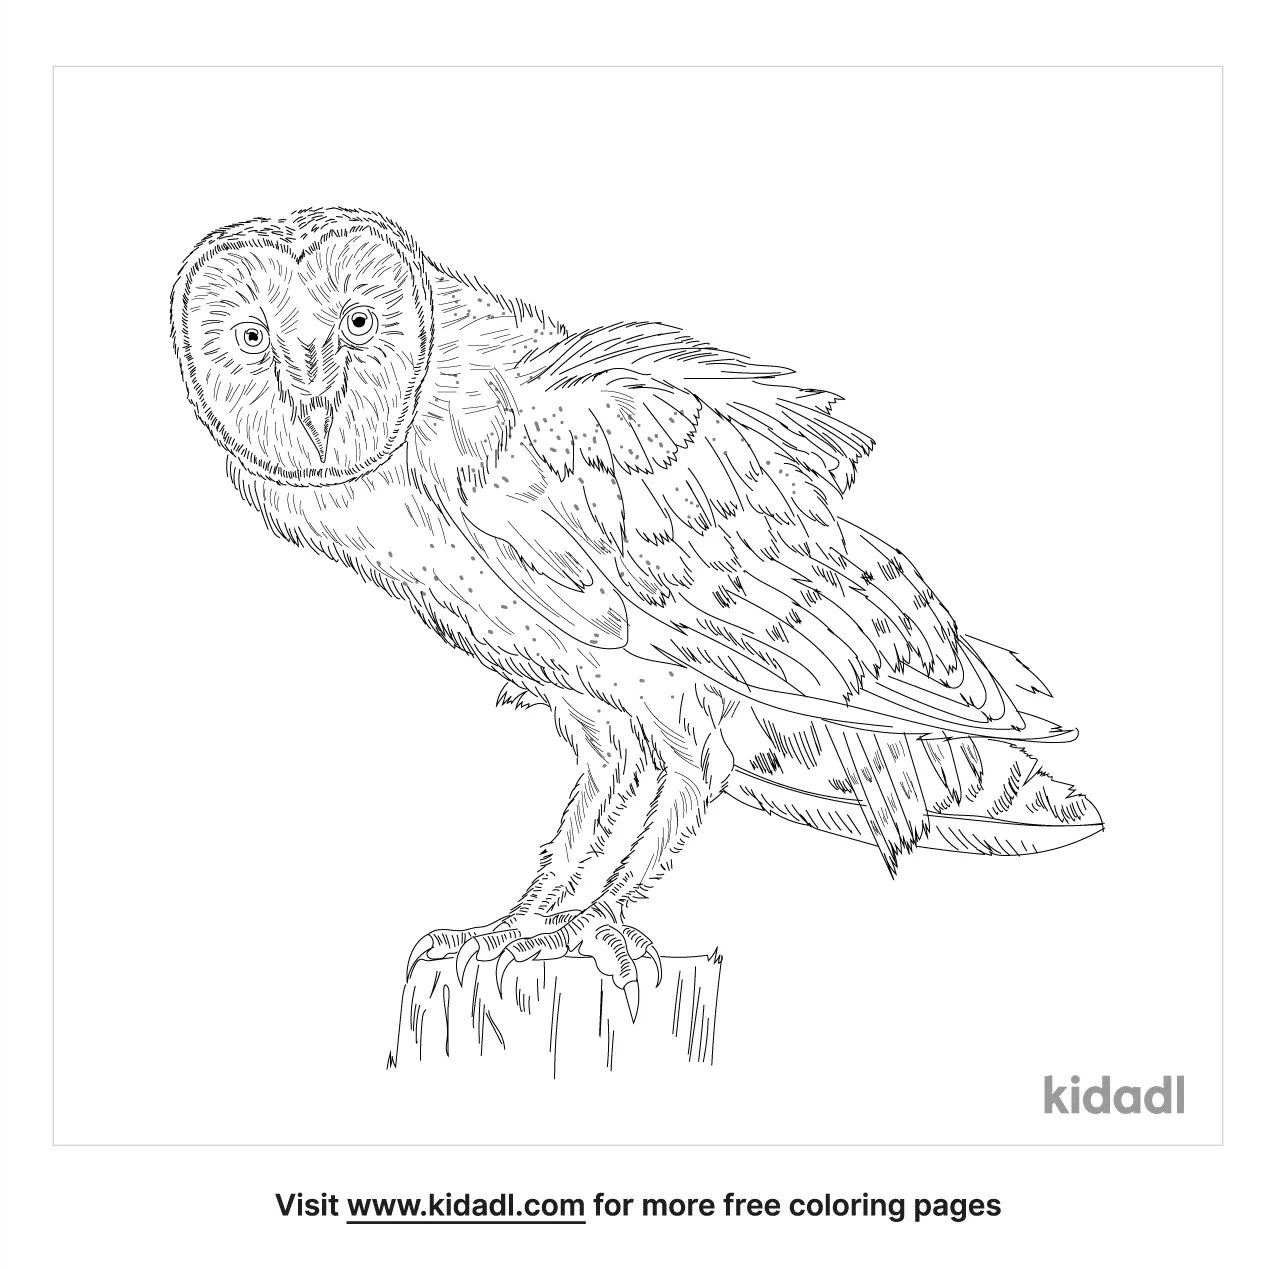 North American Barn Owl Coloring Page